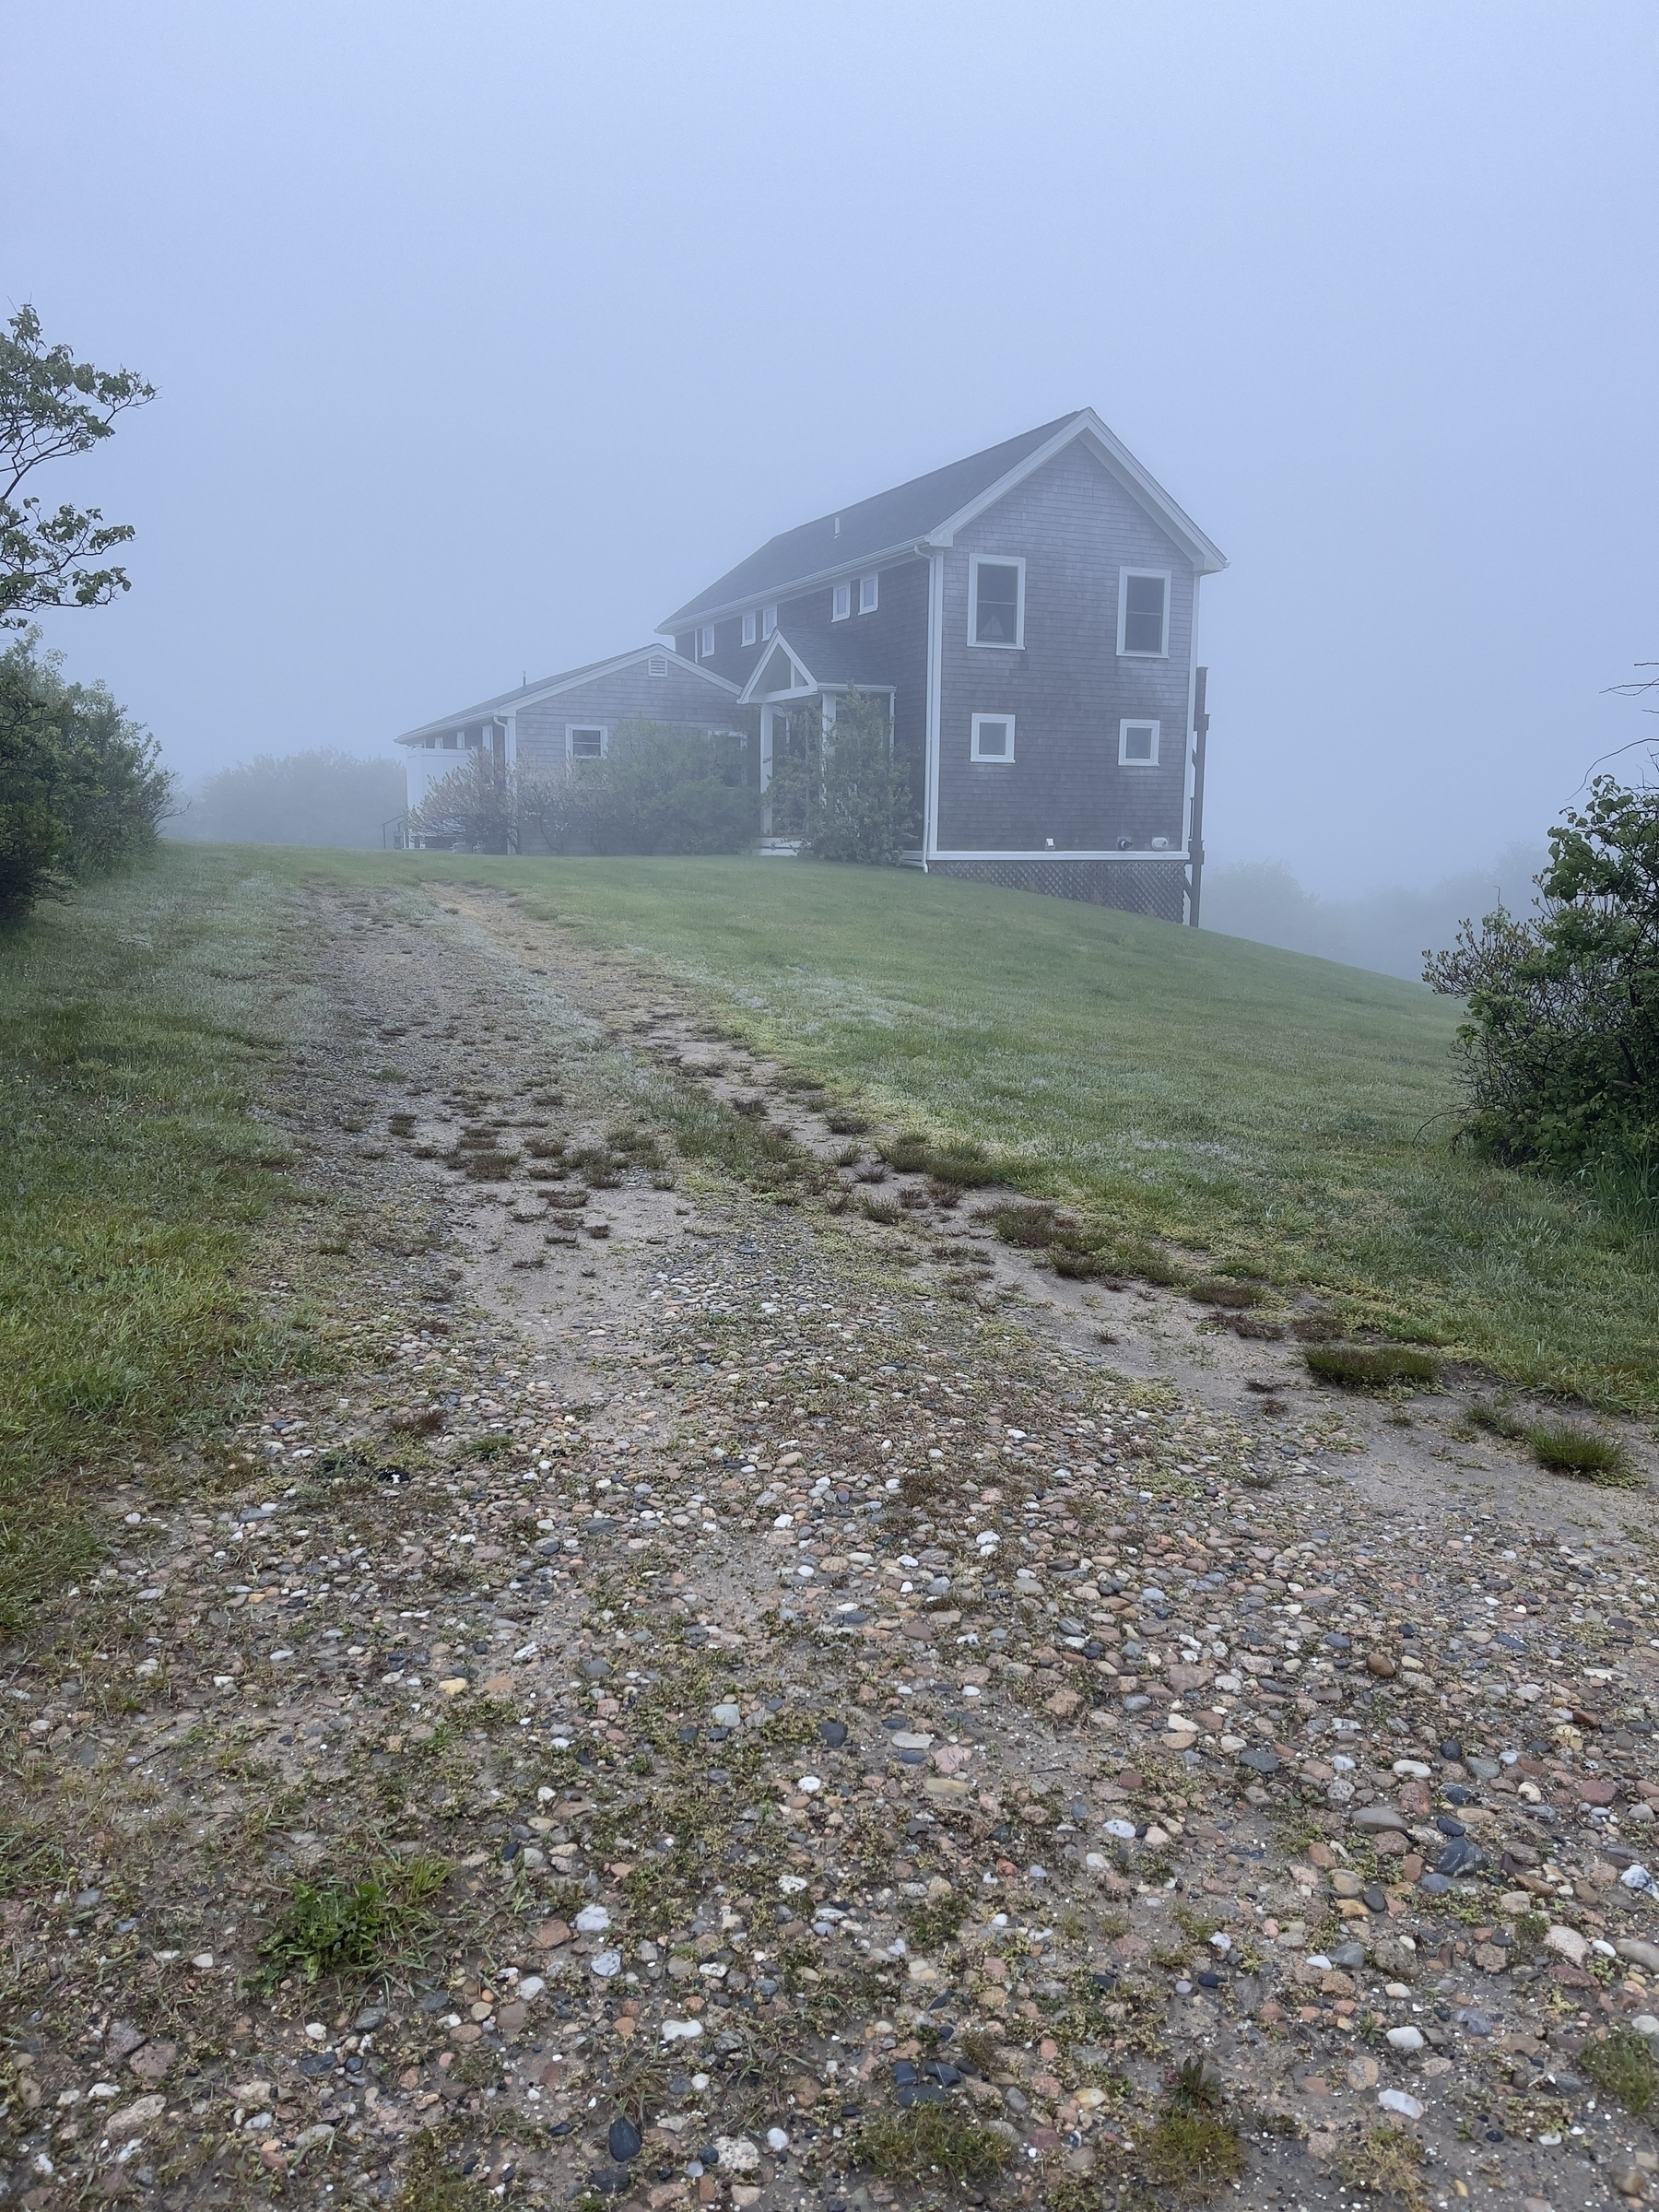 House on a rise in the landscape. Landscape beyond the house obscured by fog.